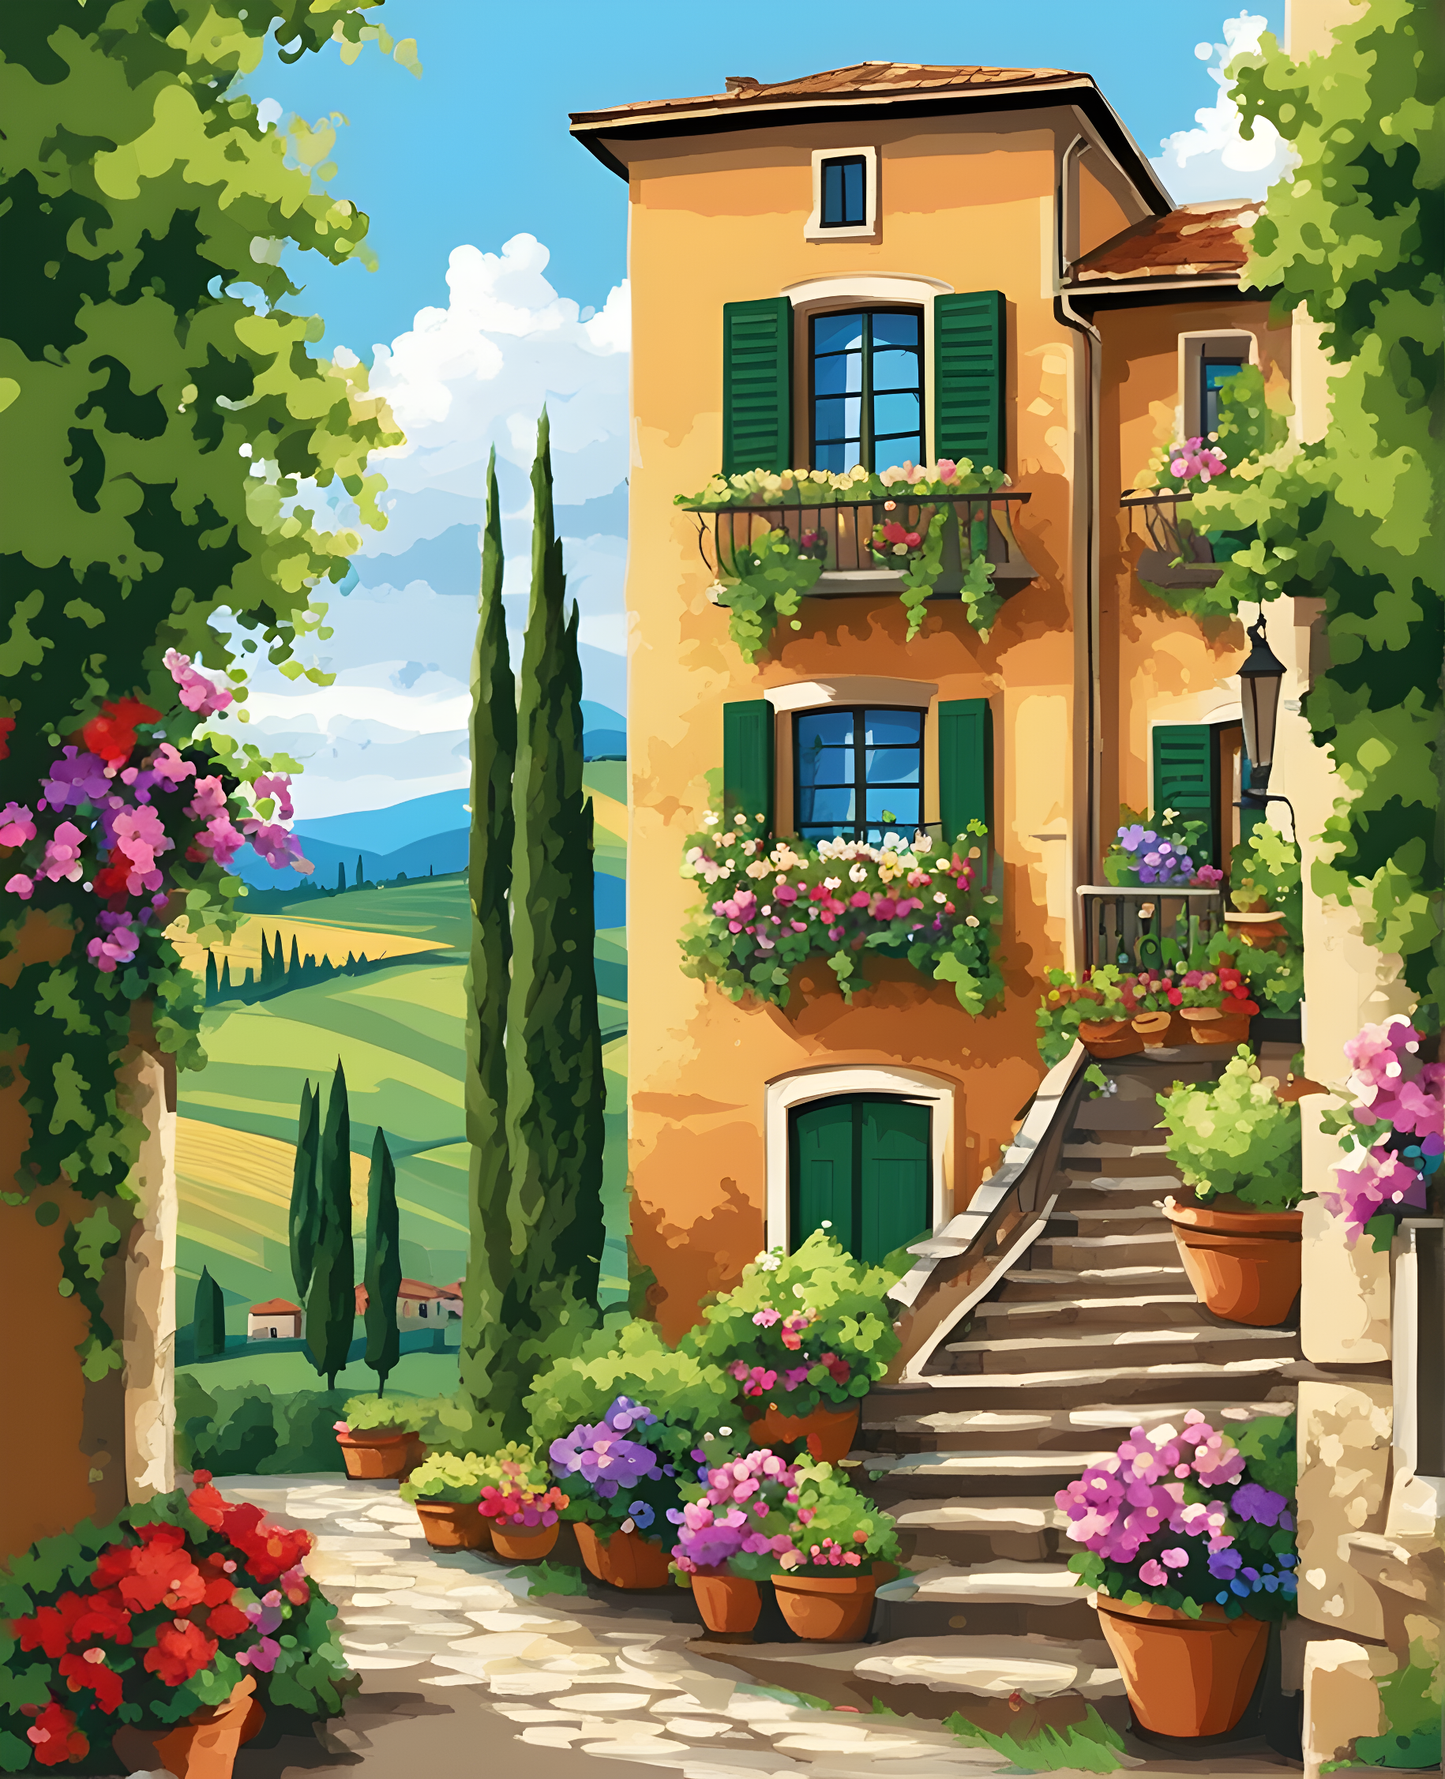 Tuscany, Italy - Van-Go Paint-By-Number Kit